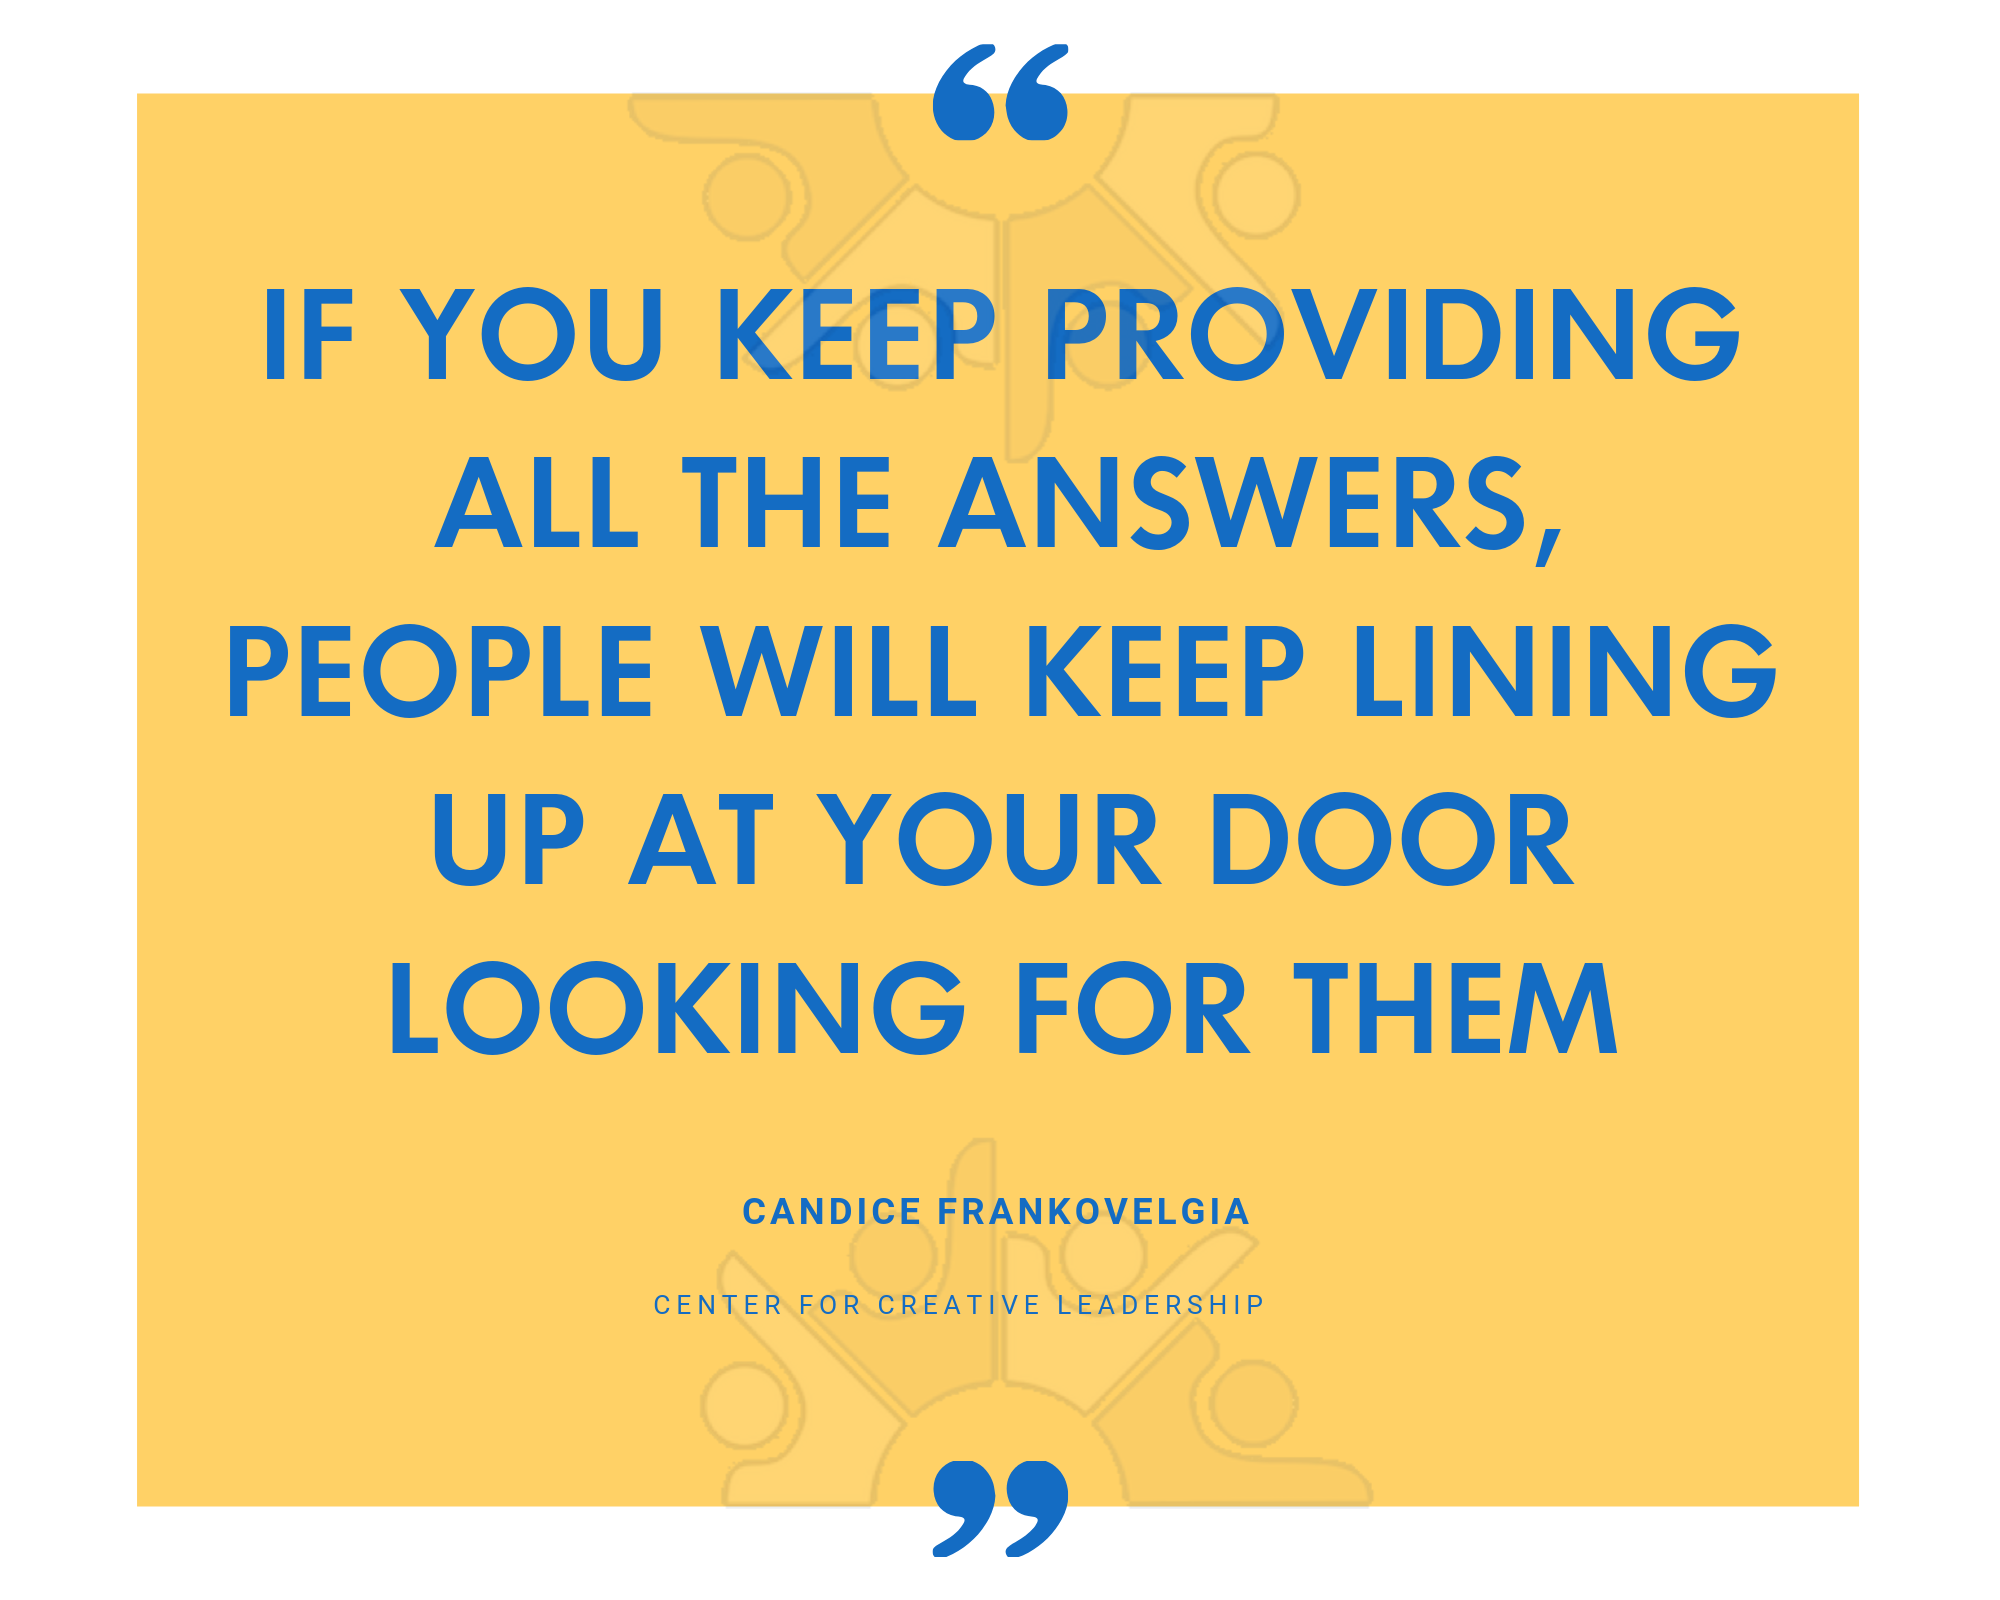 If you keep providing all the answers, people will keep lining up at your door looking for them.